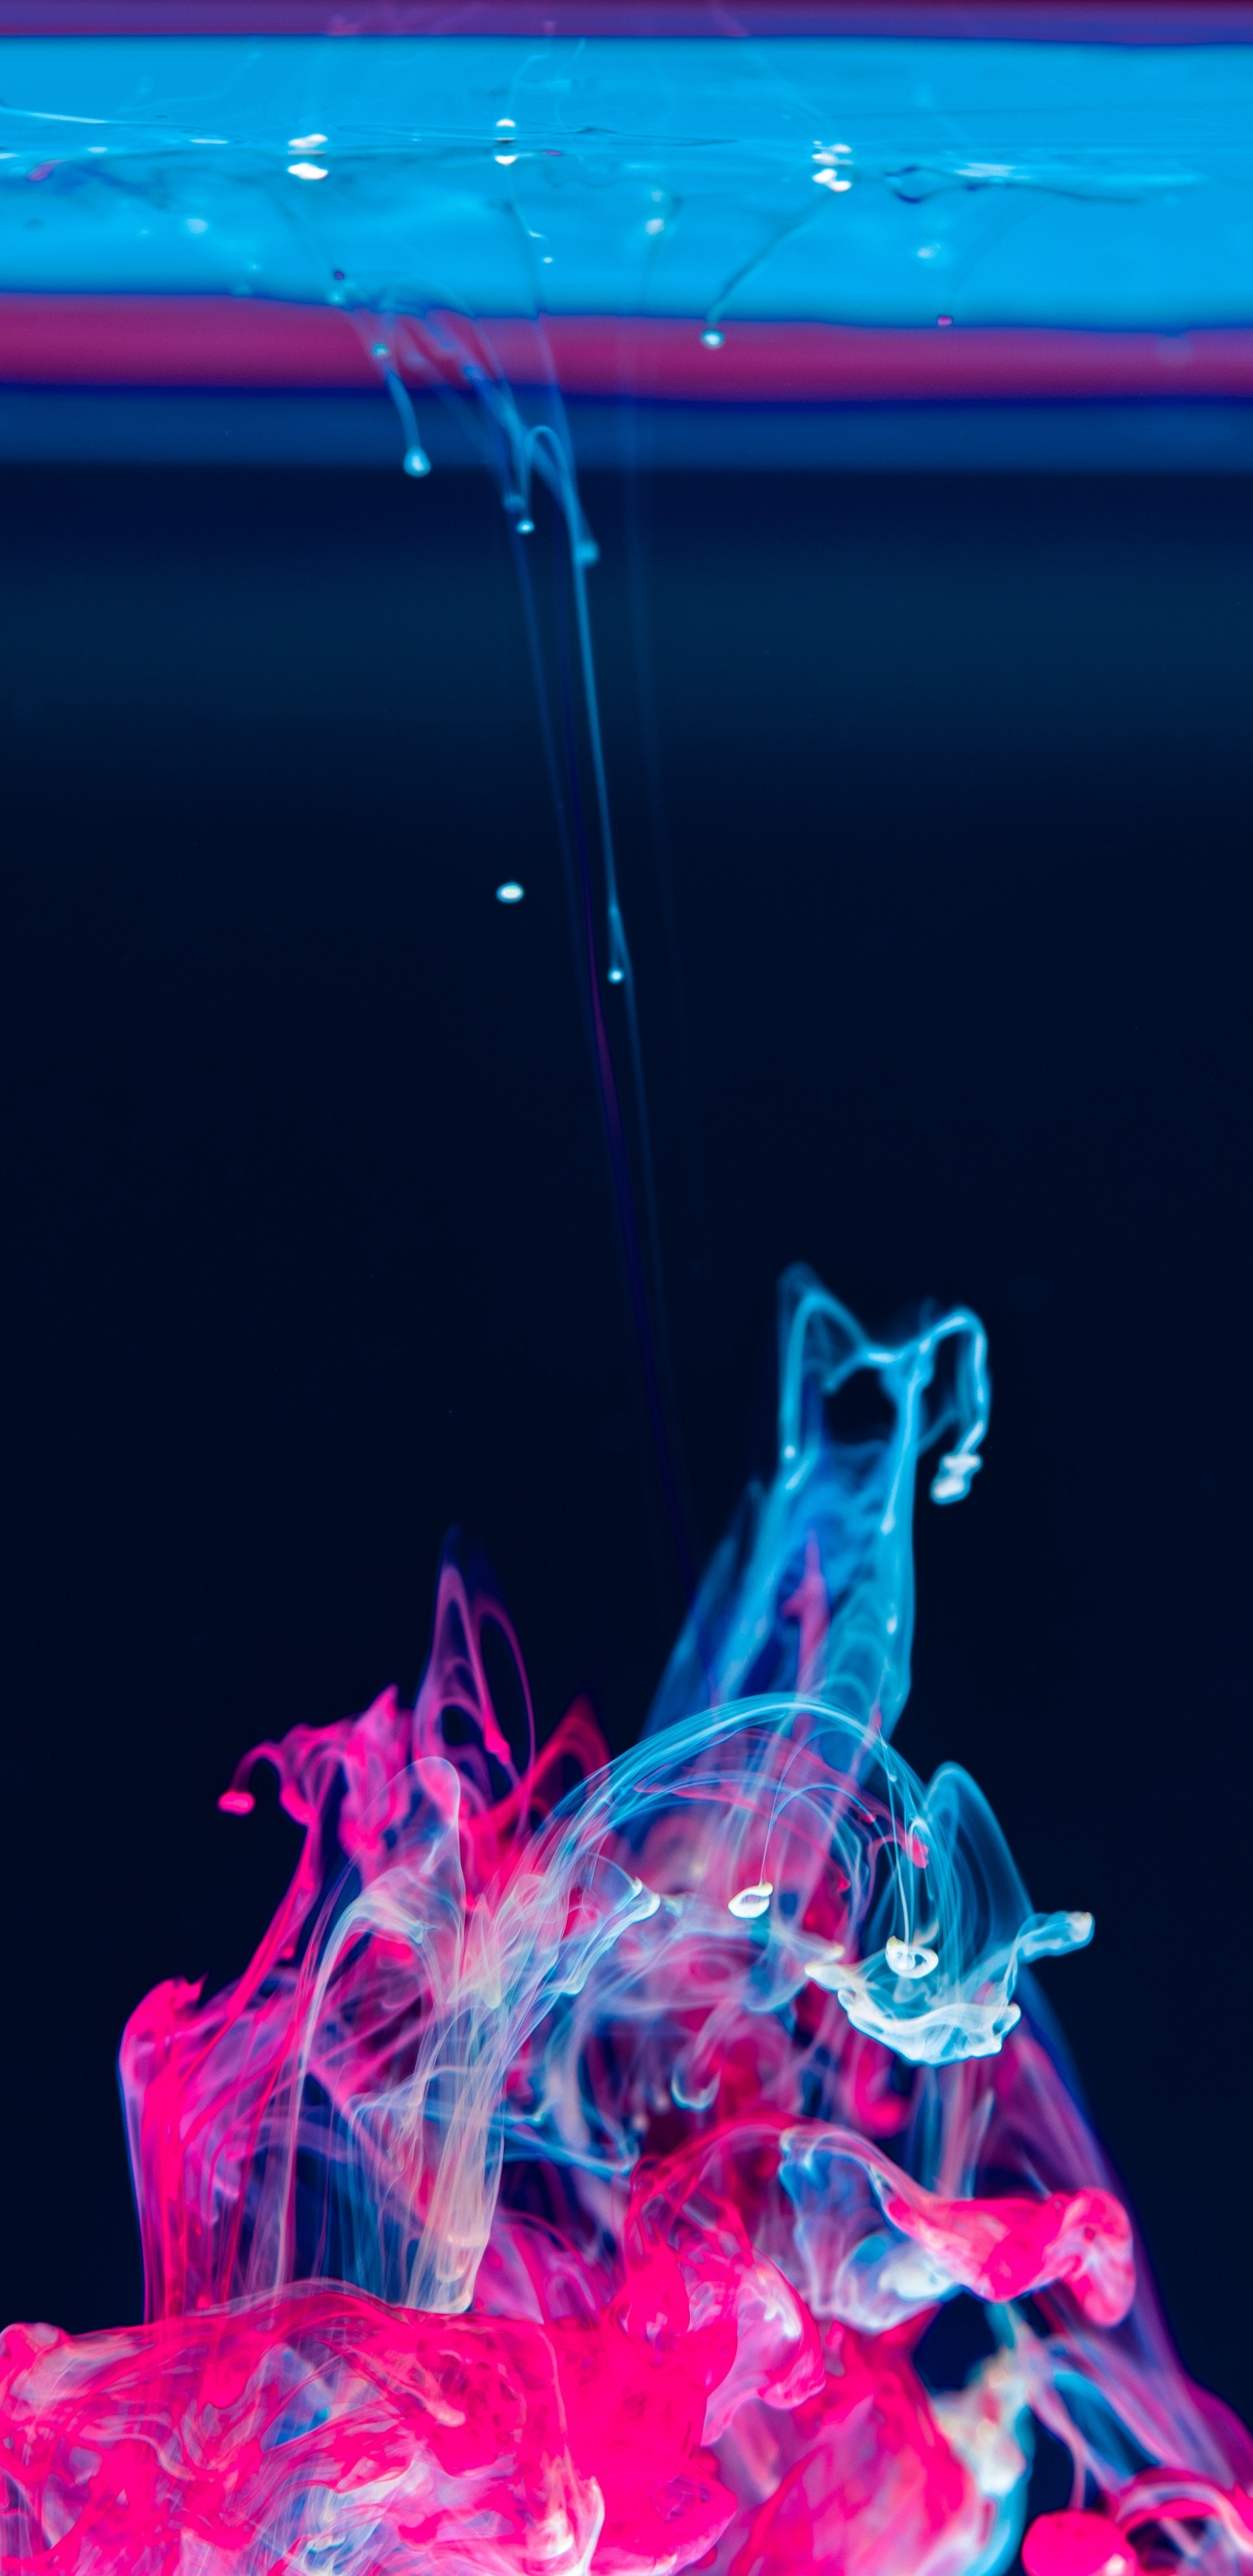 Pink and White Smoke on Blue Surface. Wallpaper in 1440x2960 Resolution